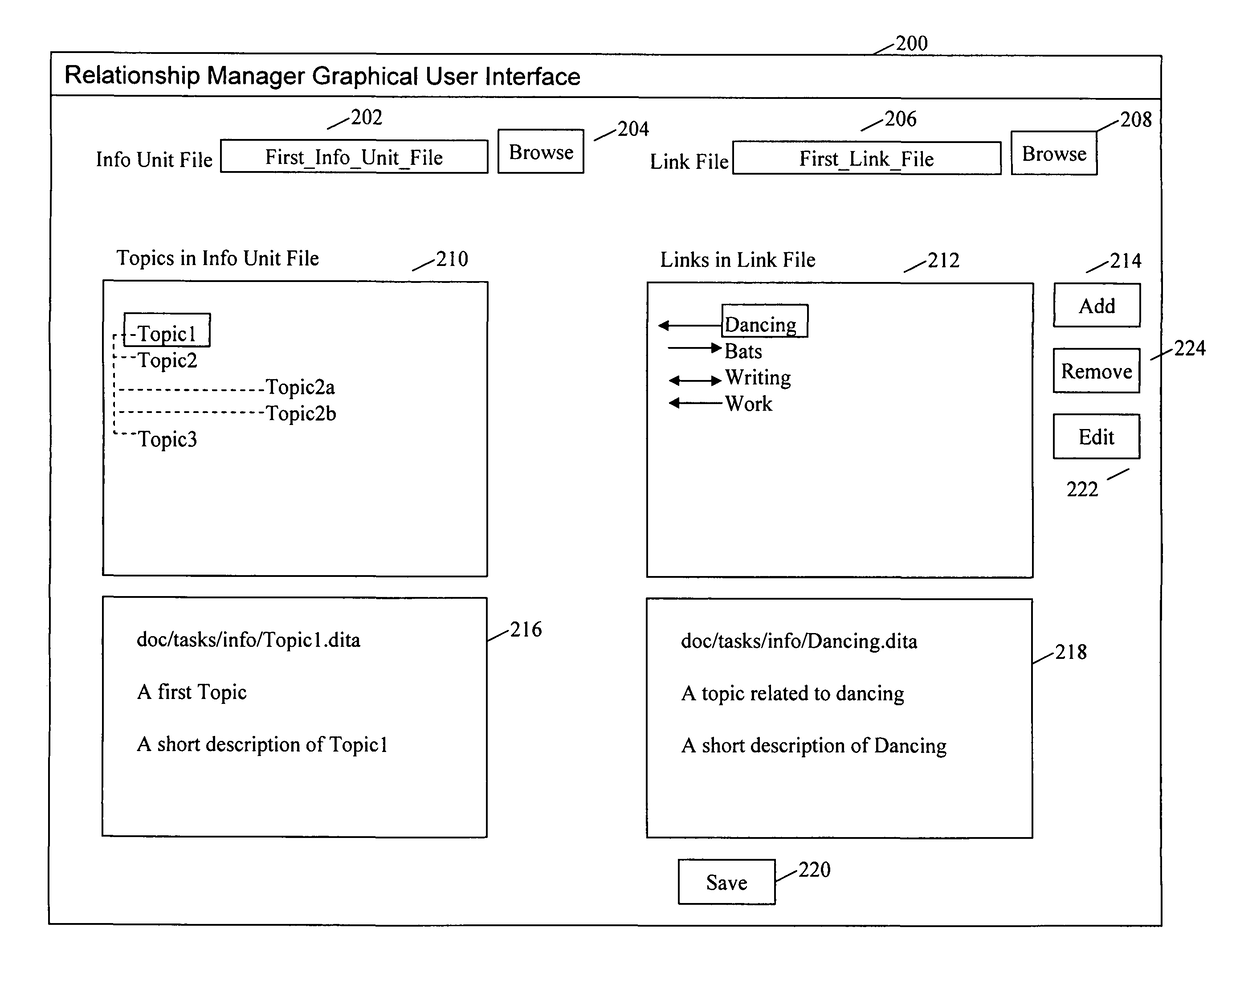 Automated relationship management for darwin information typing architecture